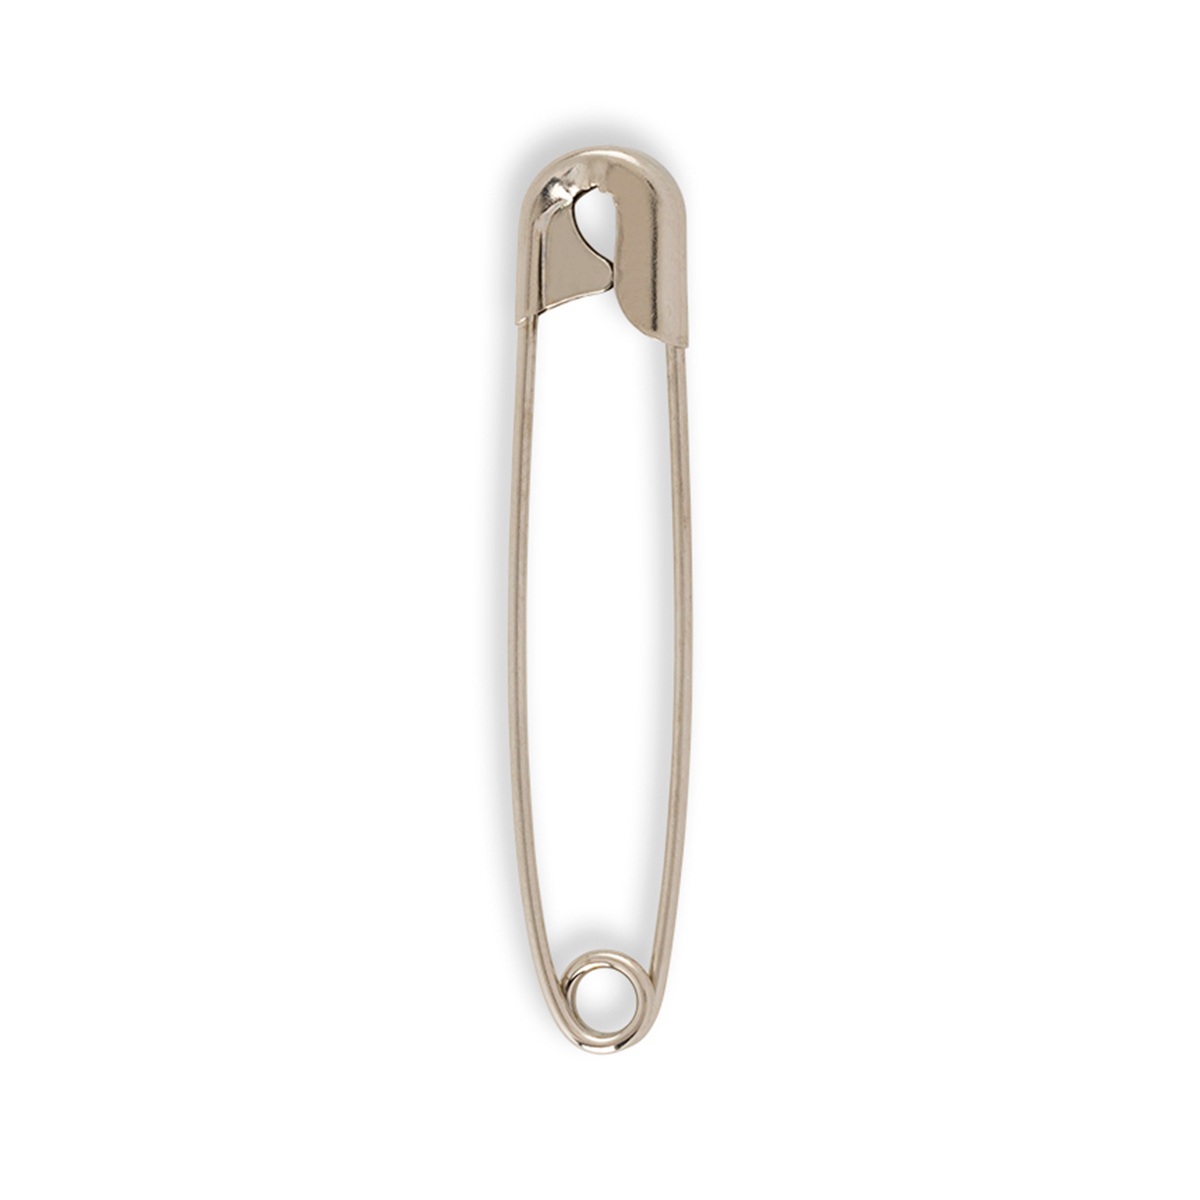 Supreme Safety Pins 1.5 inch. Item, X-2-SC #2 Closed Pin (1440, Nickel  plated)